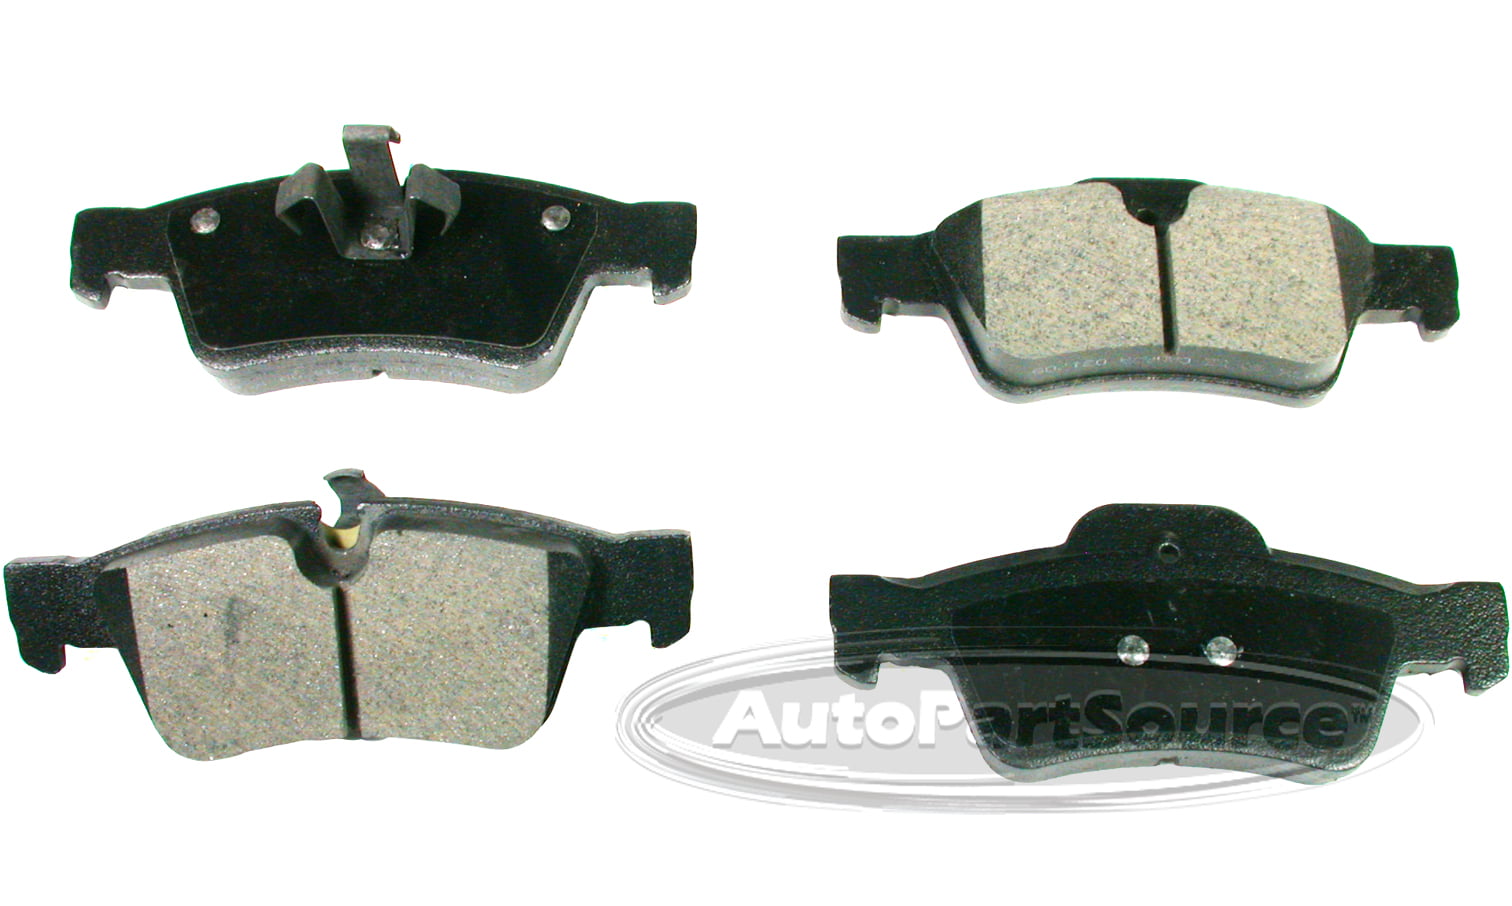 Set of 2 Rear Brake Caliper Assembly Replacement for Mercedes-Benz ML320 ML350 ML450 R320 R350 R500 